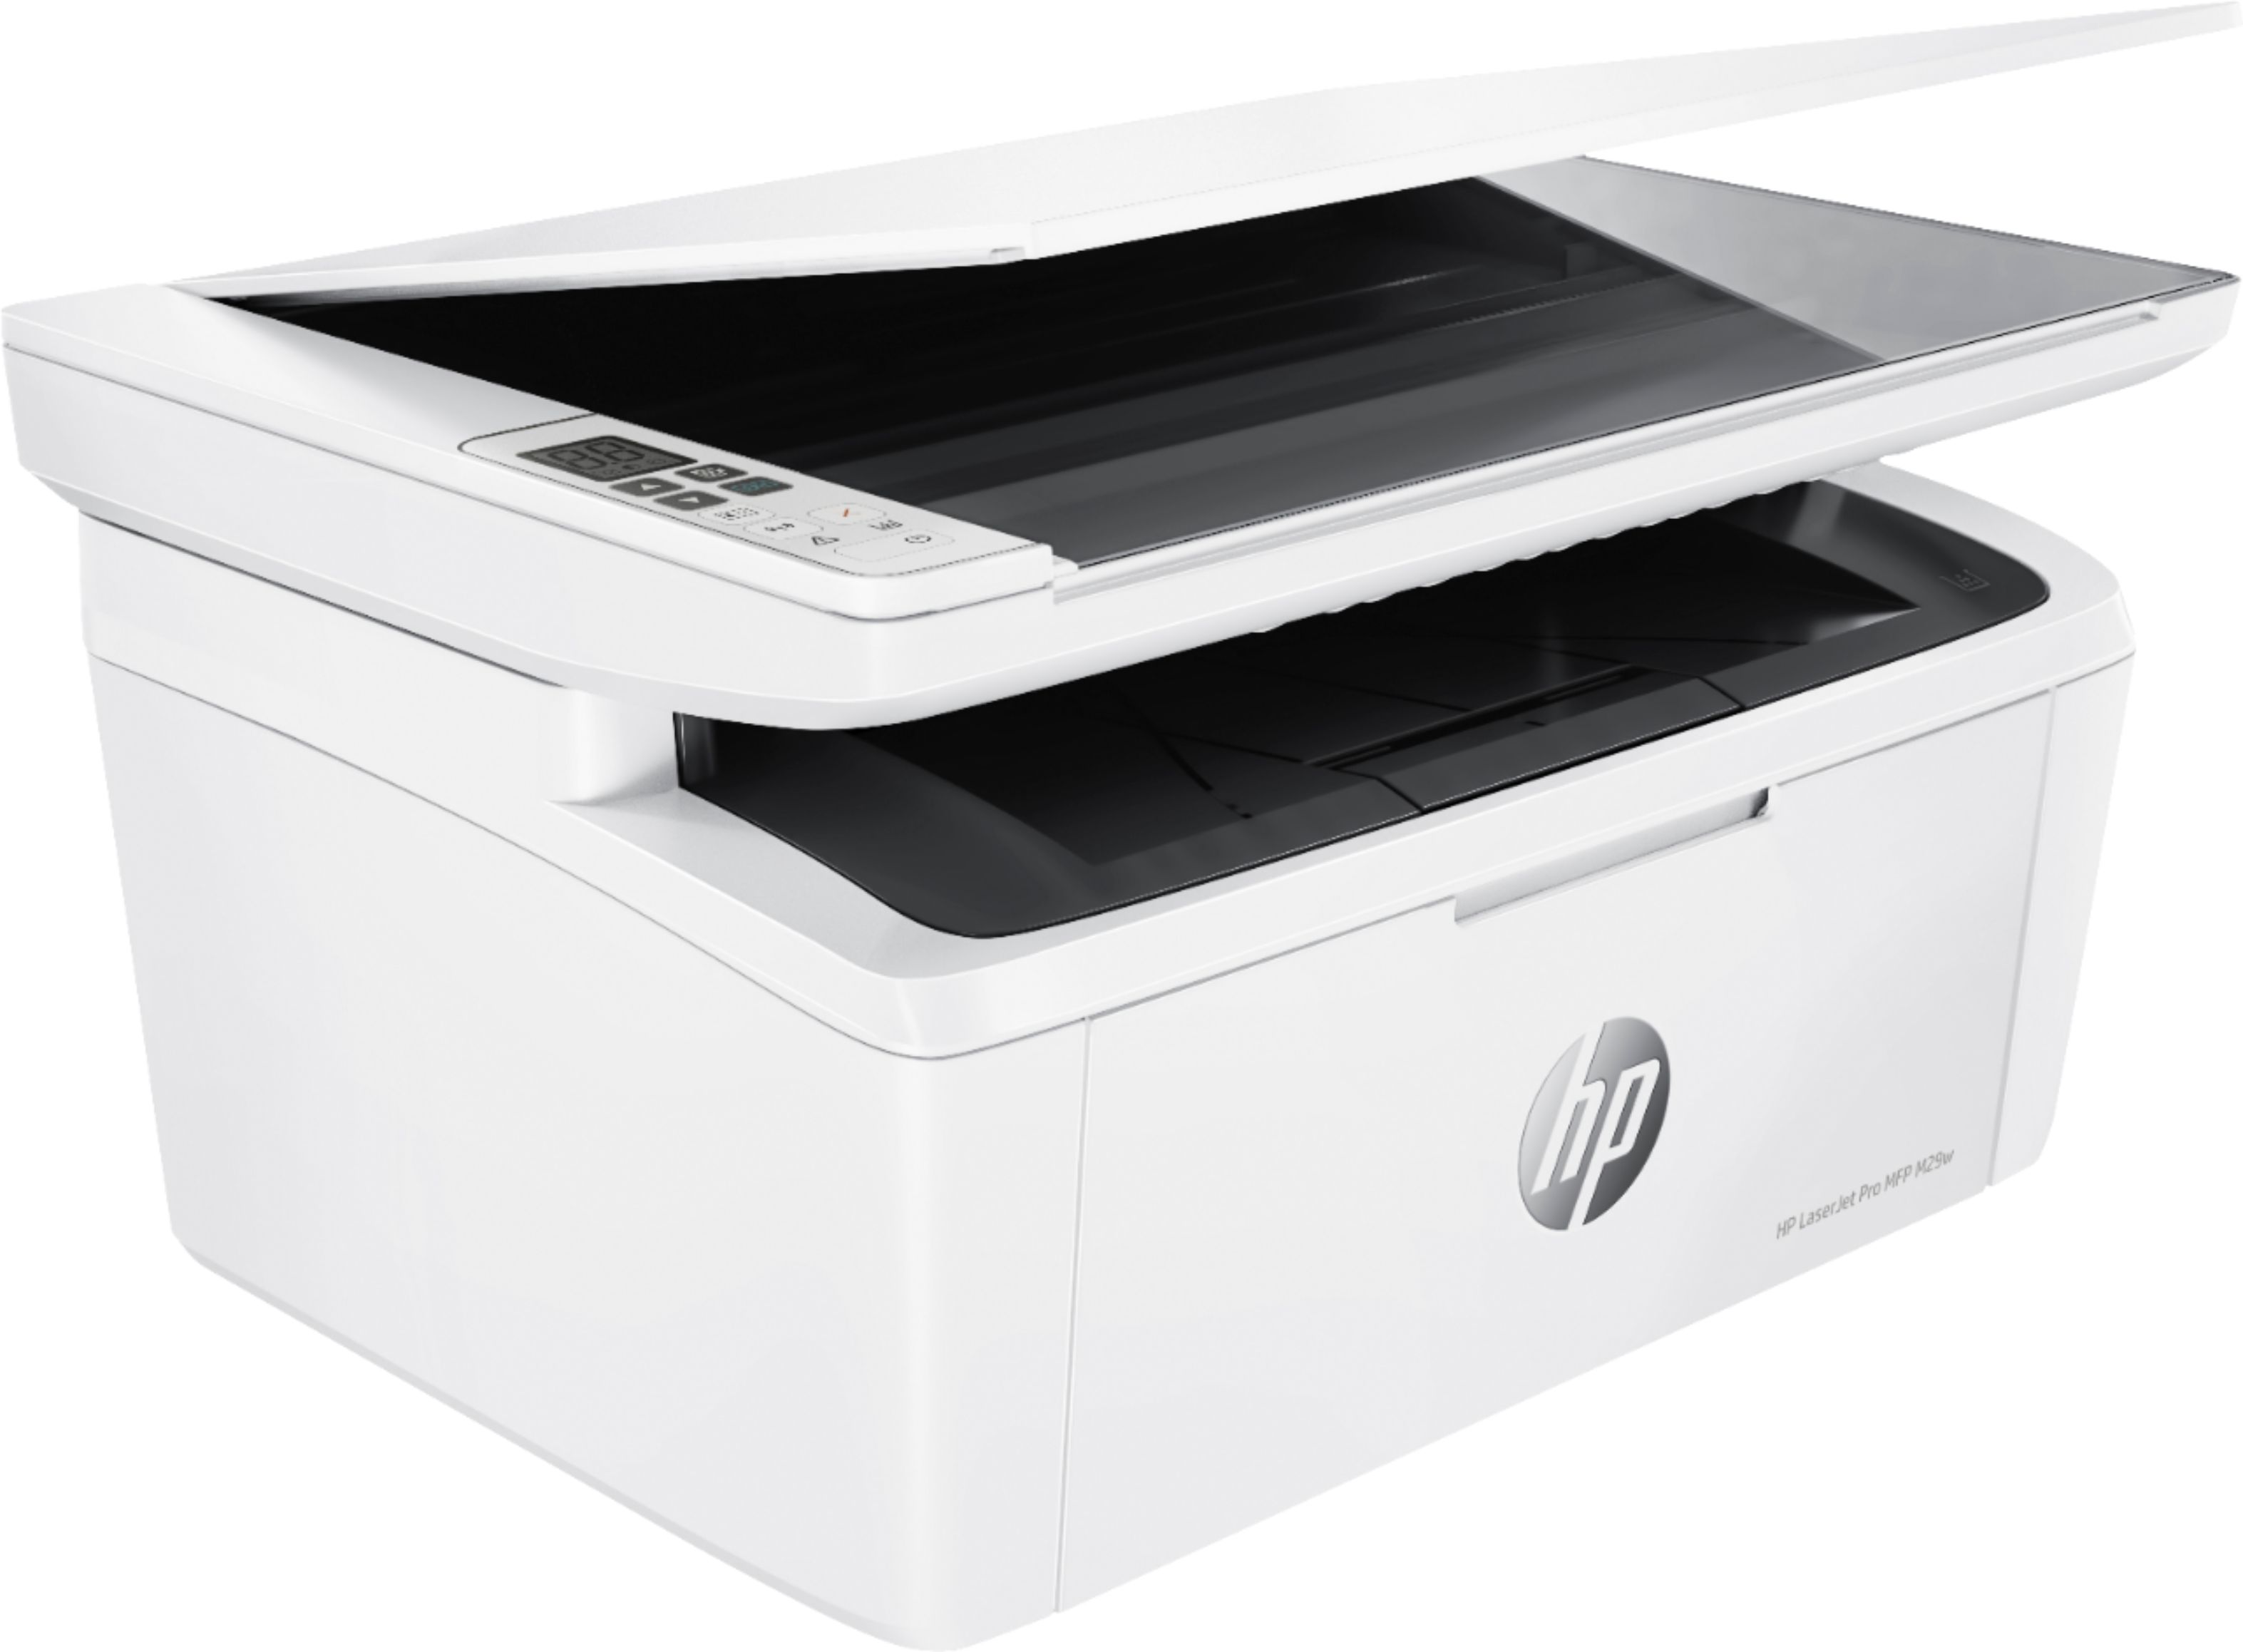 Angle View: HP - Refurbished LaserJet Pro MFP M180nw Wireless Color All-In-One Laser Printer - White